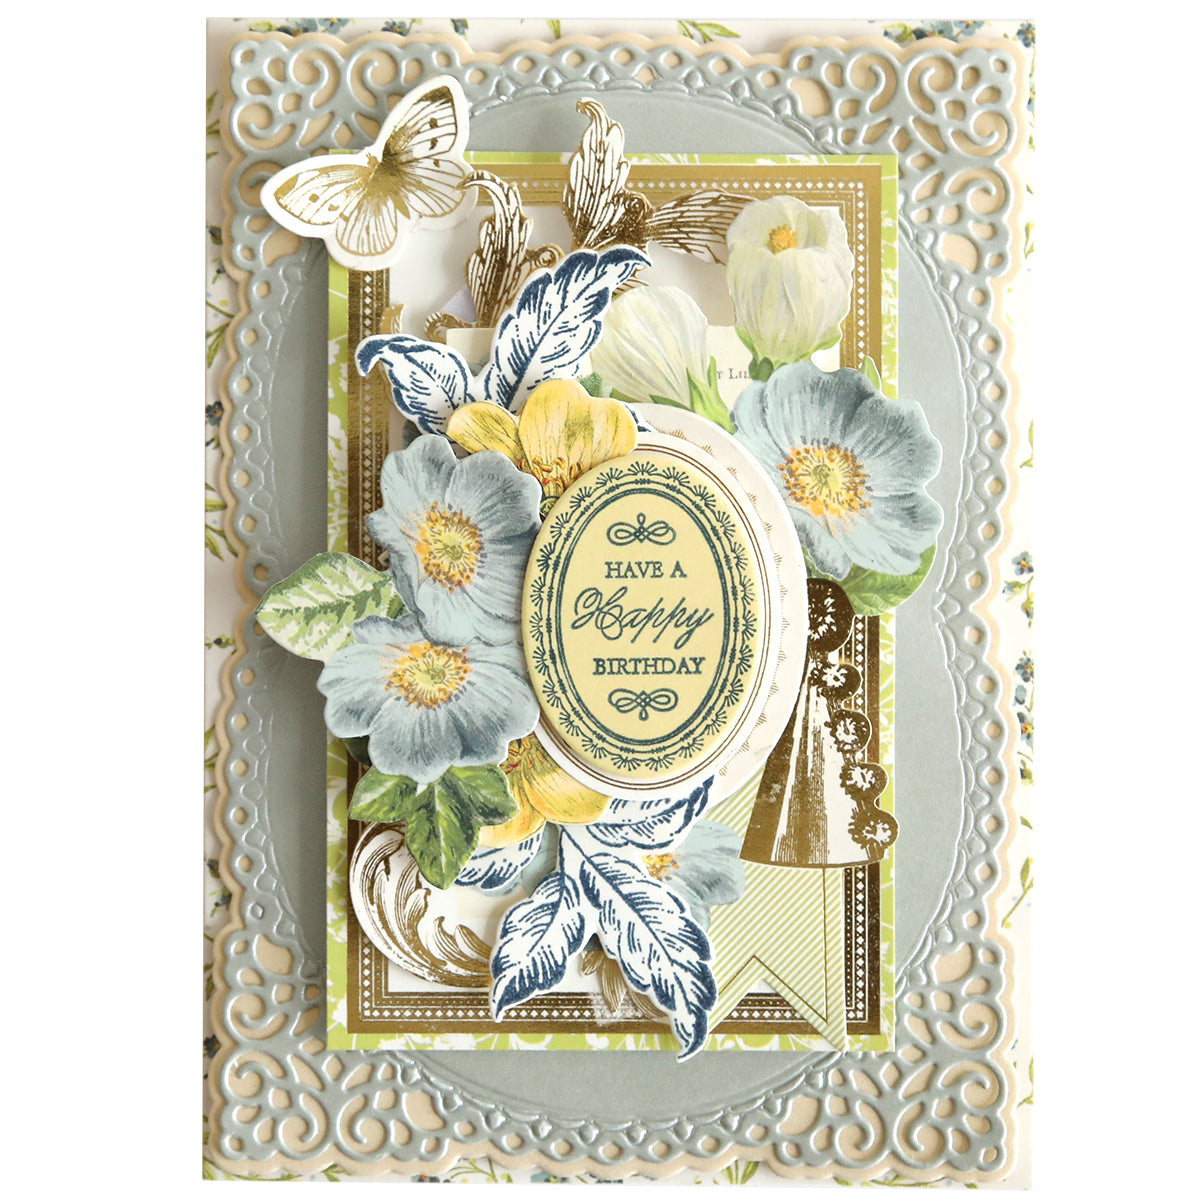 Handcrafted birthday card with Wildflower Meadow Stamps and Dies embellishments and butterfly motifs and a "have a happy birthday" greeting.